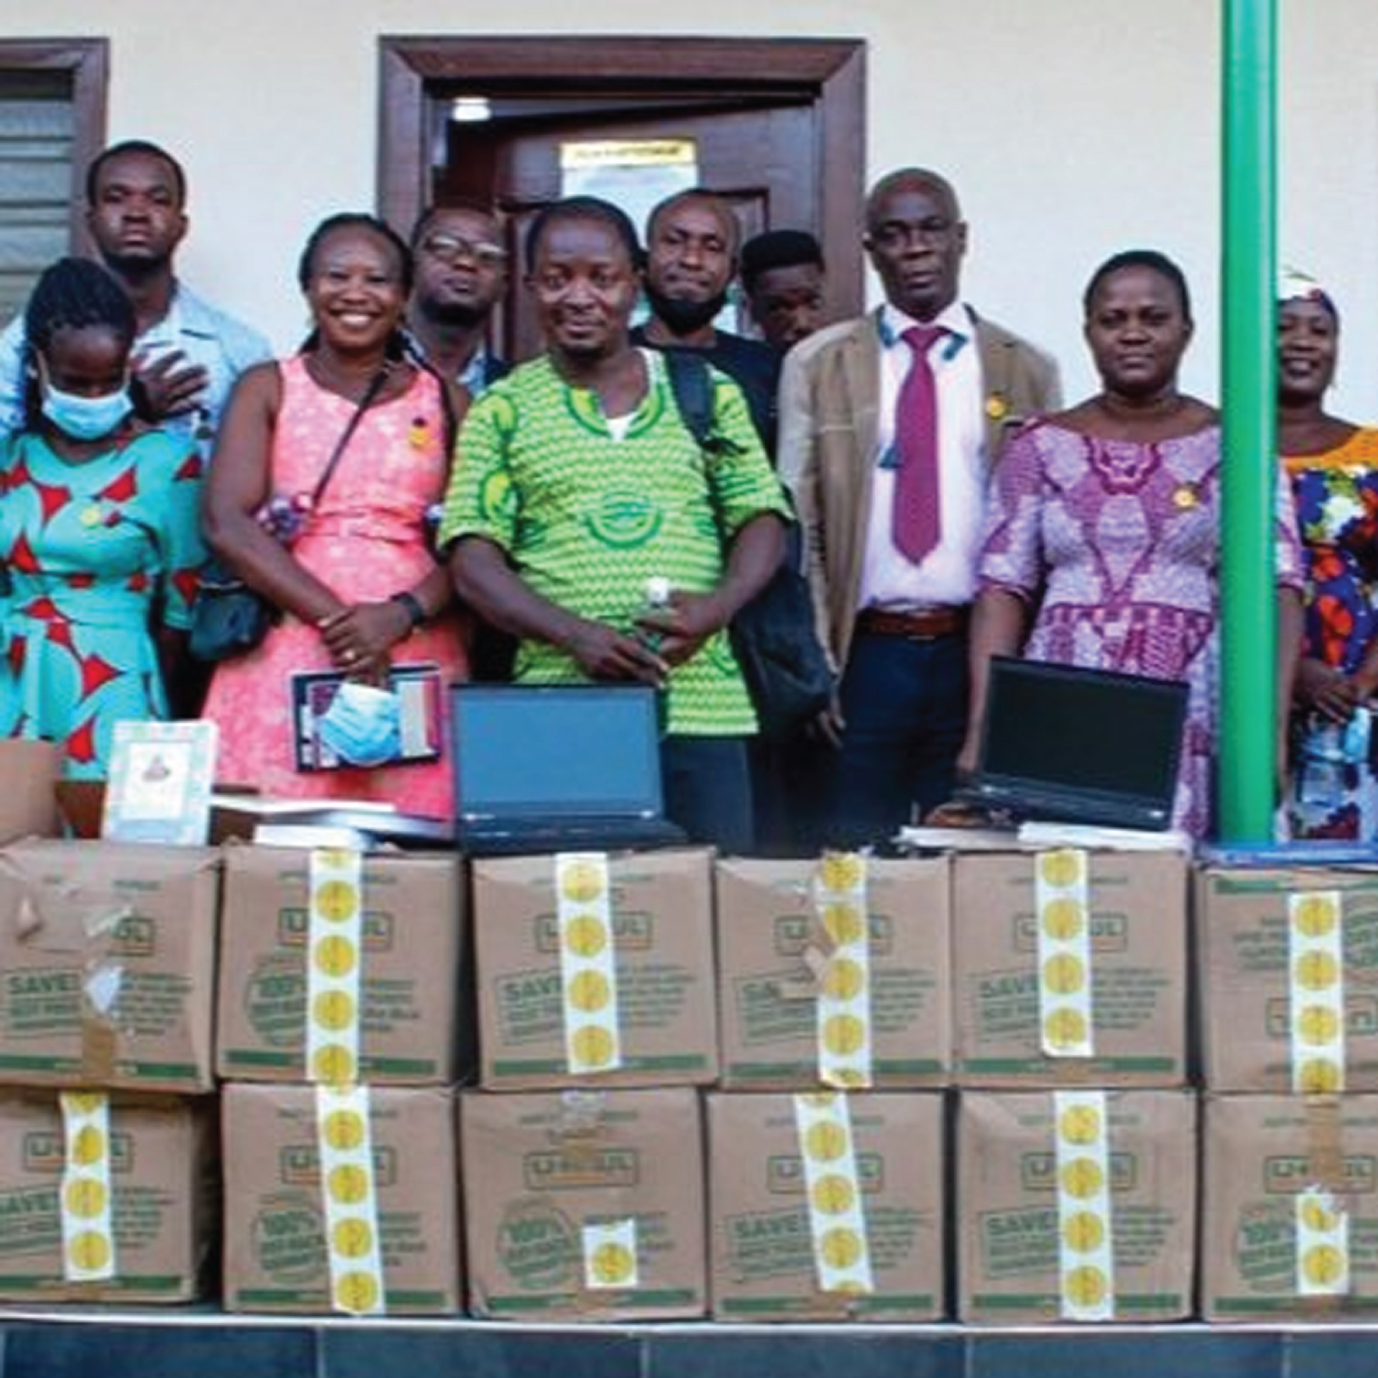 Smiles for Speech donated over 500 therapy tools, two laptops, and assessment books valued at over $20,000.00 to the Department of Speech, Language and Hearing Sciences at the School of Allied Health Sciences (SAHS) in rural Ghana.